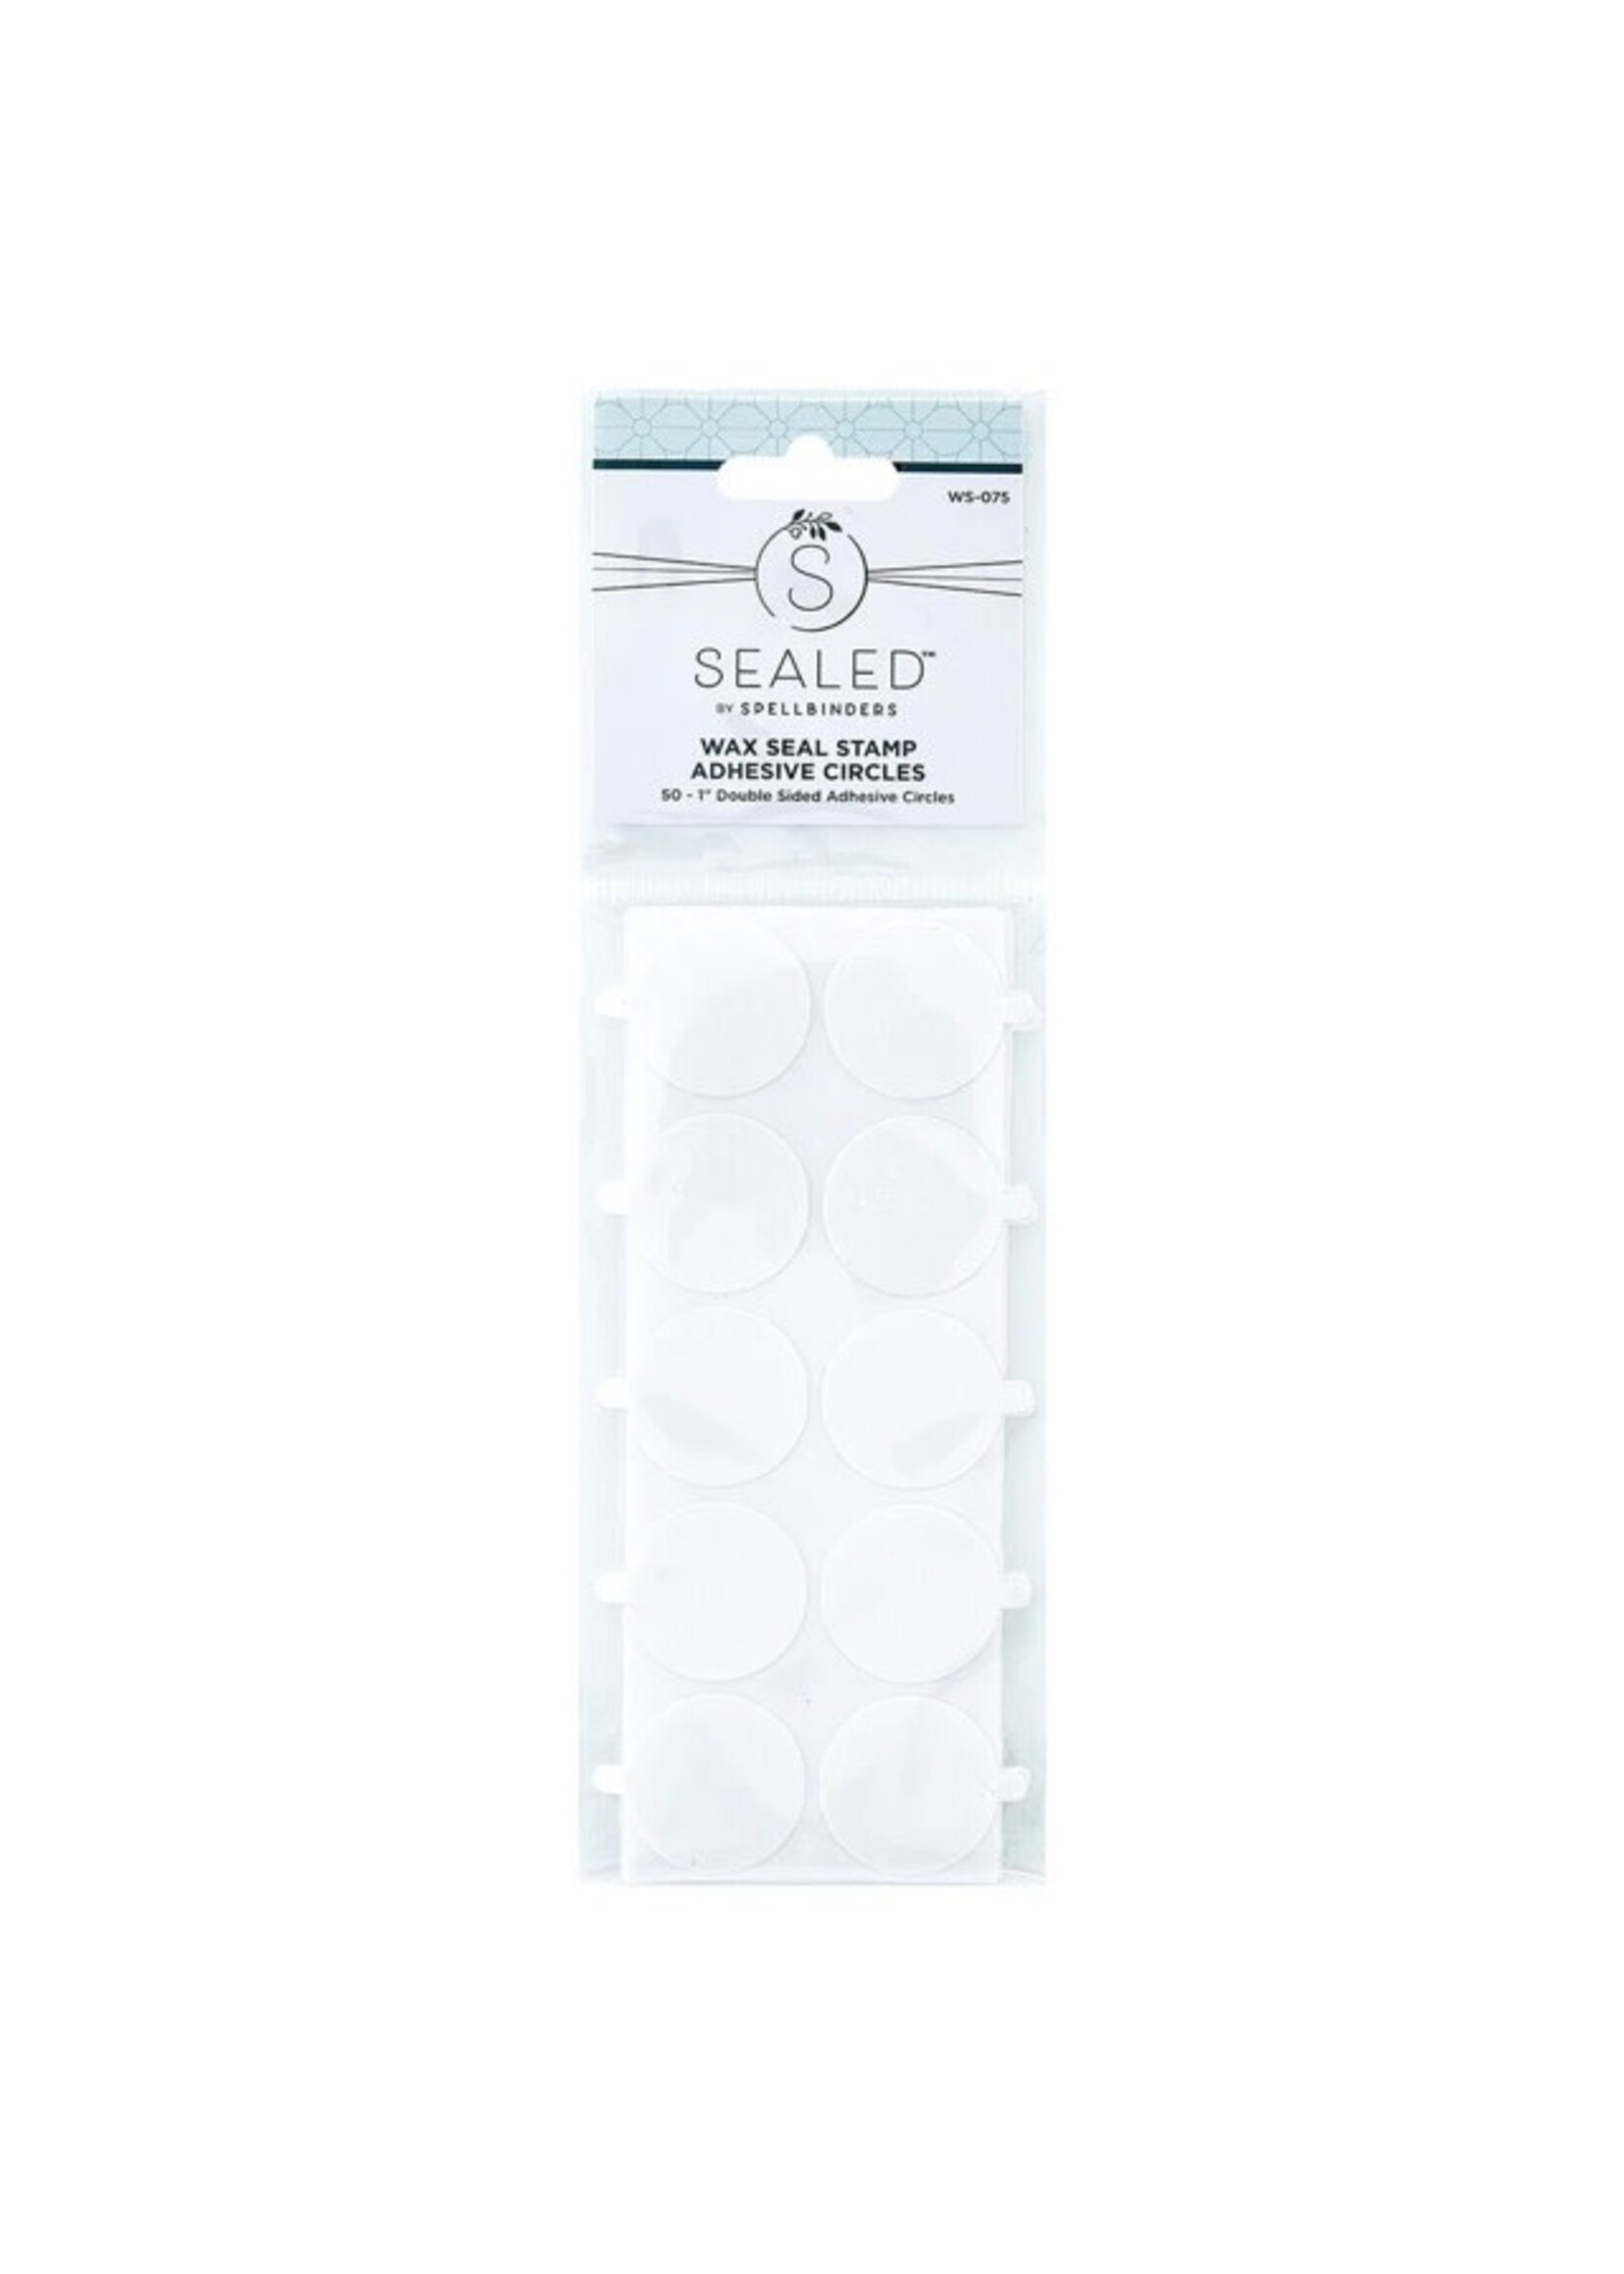 spellbinders Sealed Wax Seal Adhesive Circles from the Sealed for Summer Collection